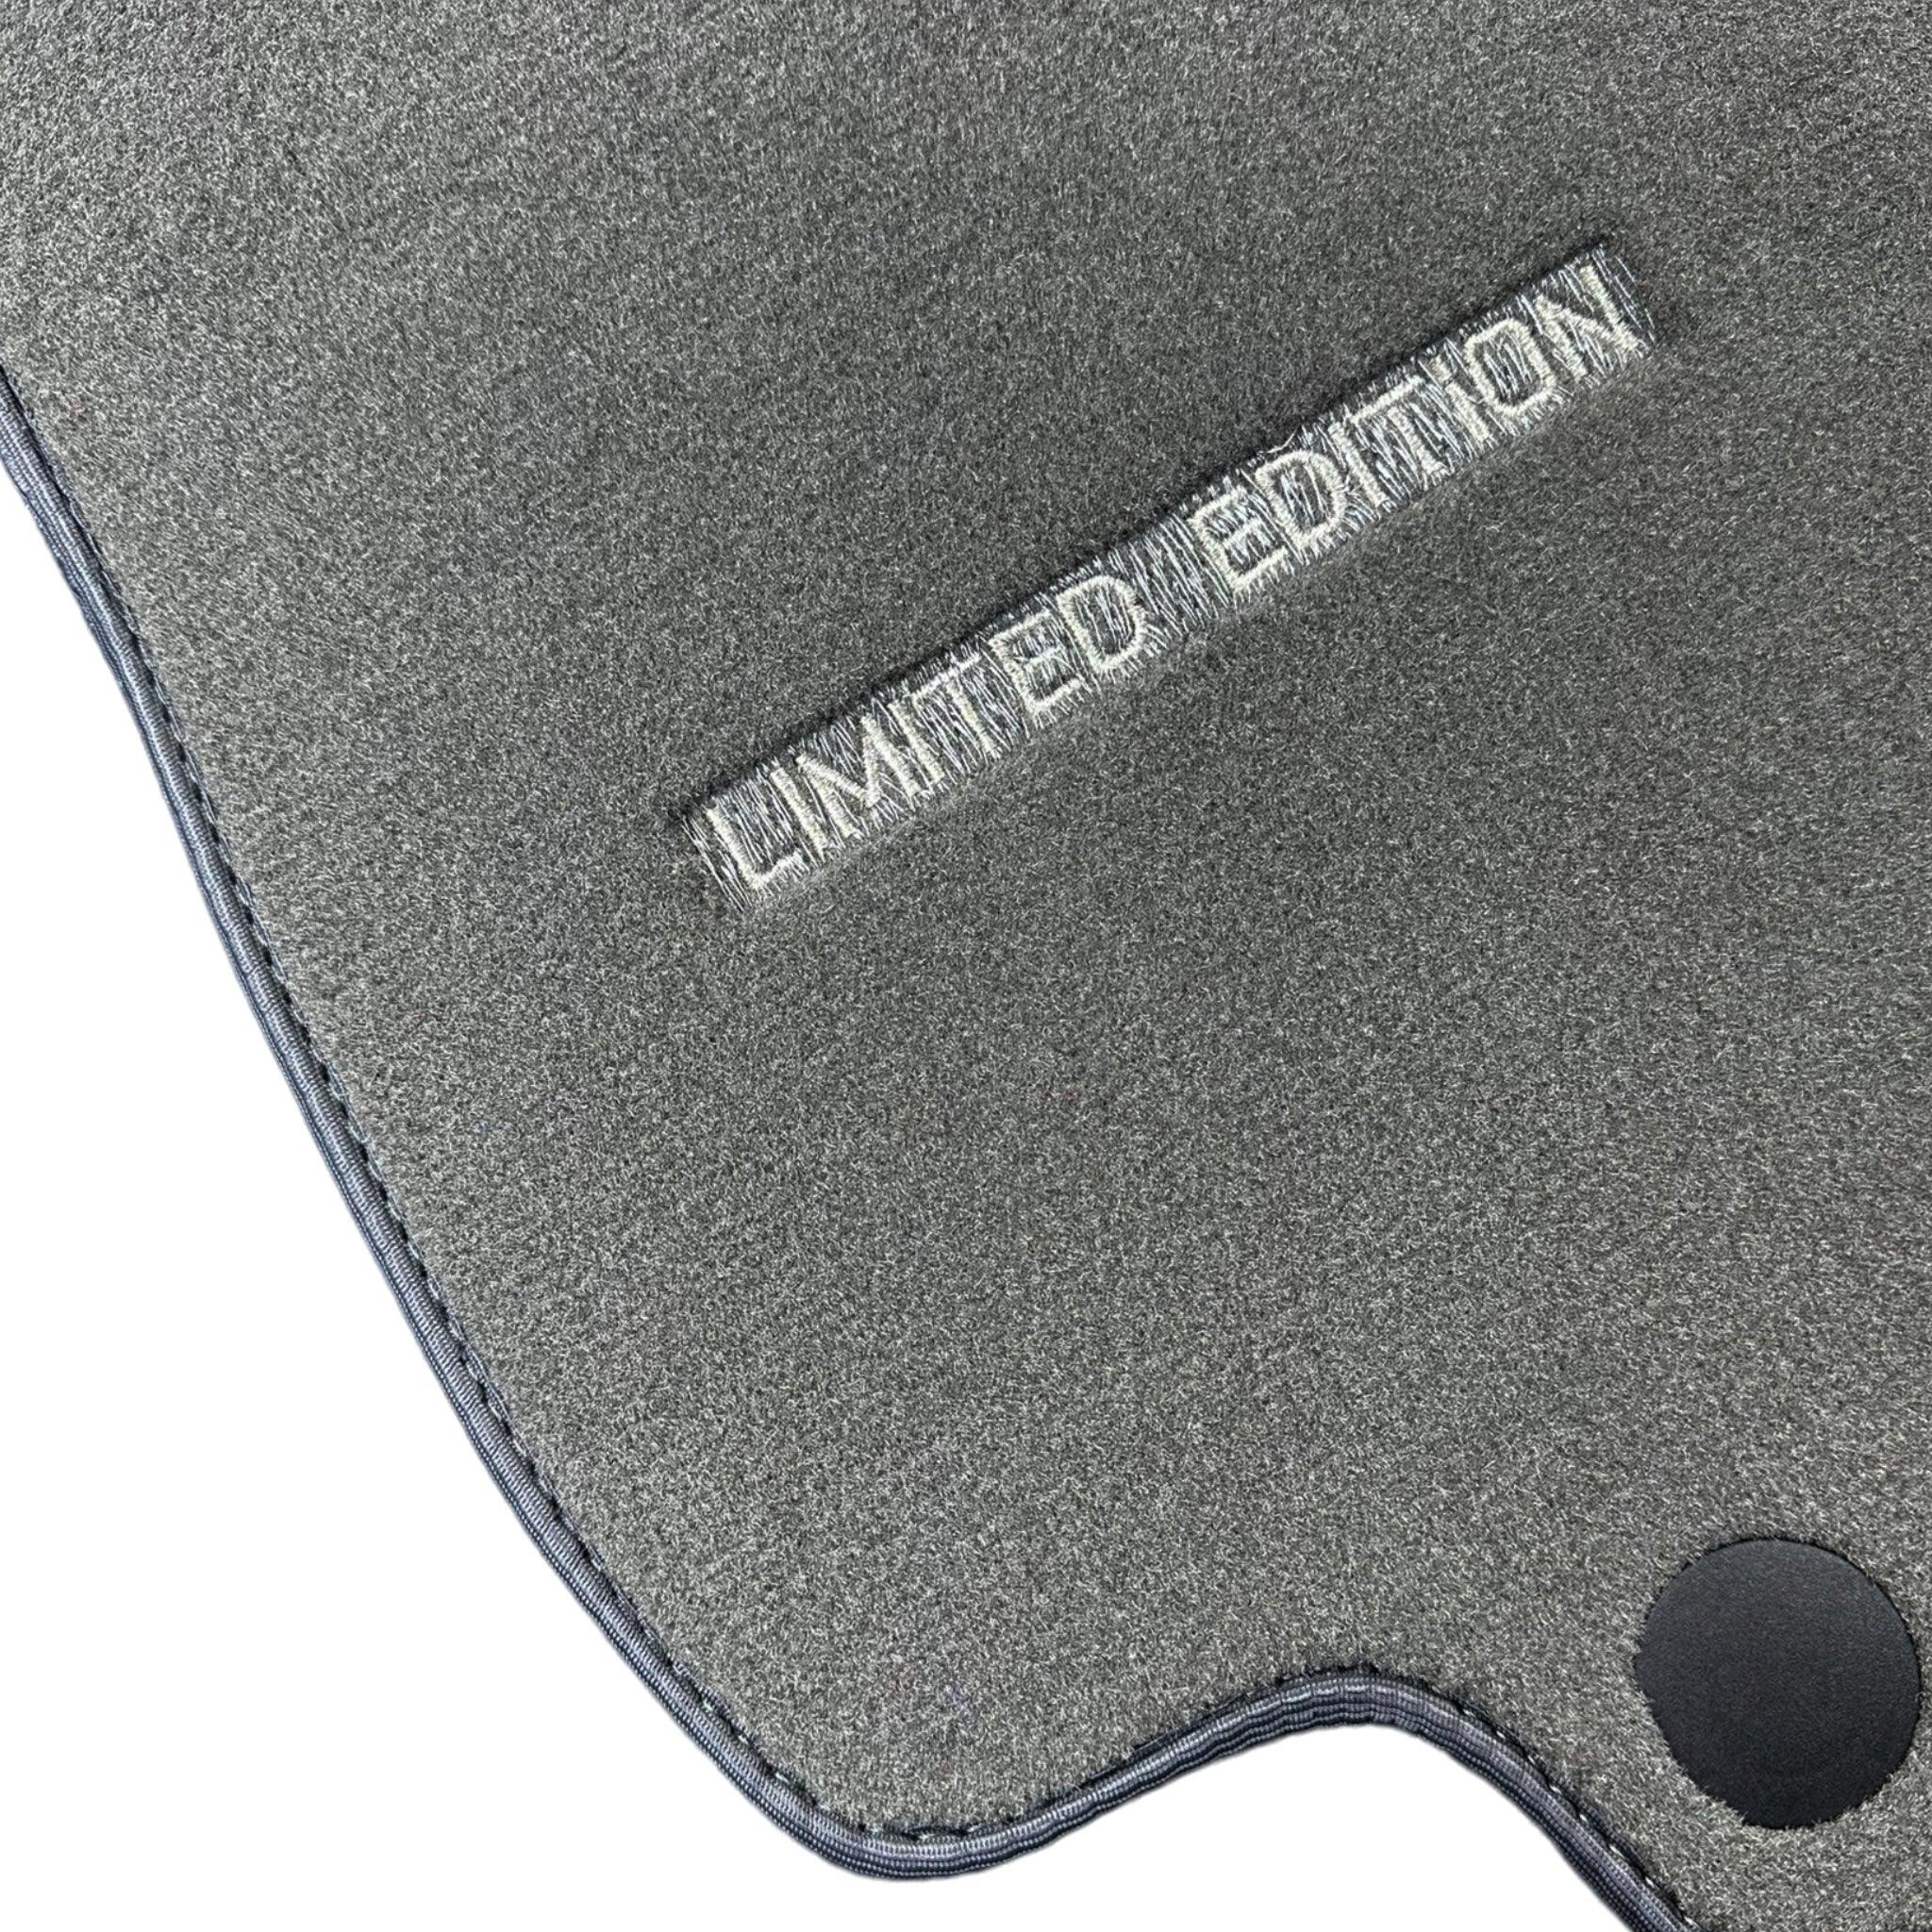 Gray Floor Mats For Mercedes Benz EQA-Class H243 (2021-2023) | Limited Edition